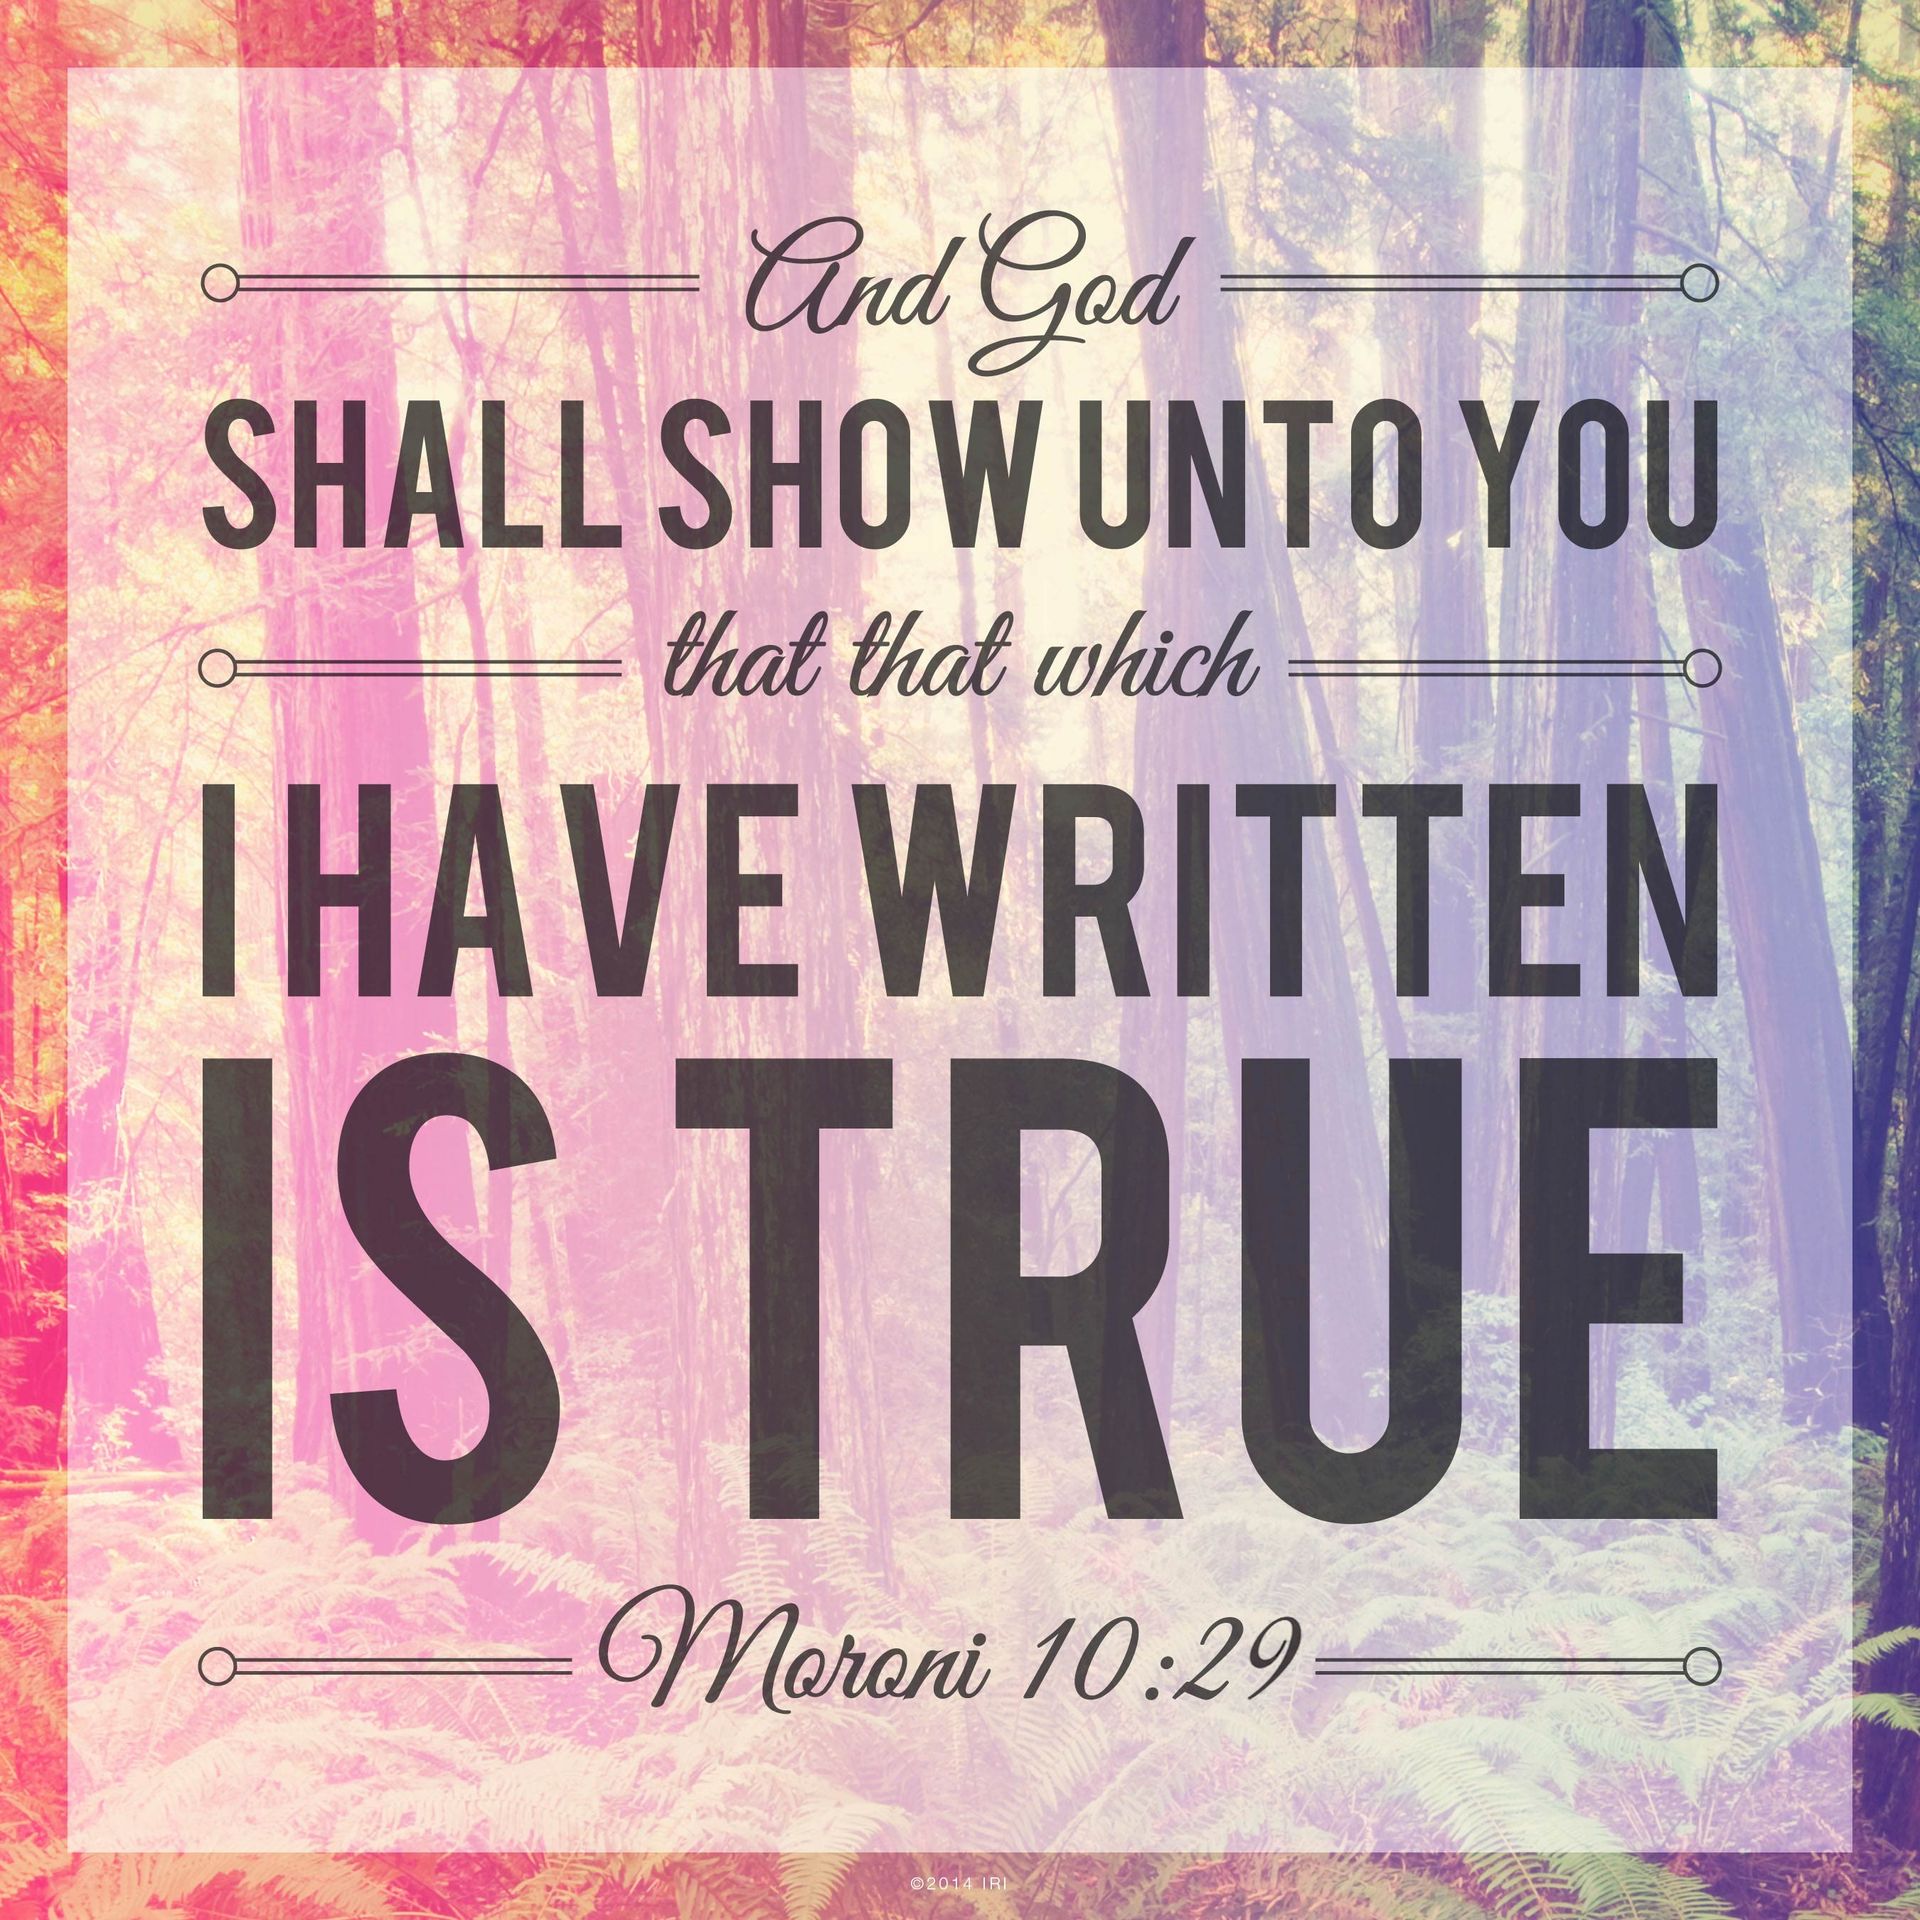 “And God shall show unto you, that that which I have written is true.”—Moroni 10:29 © undefined ipCode 1.